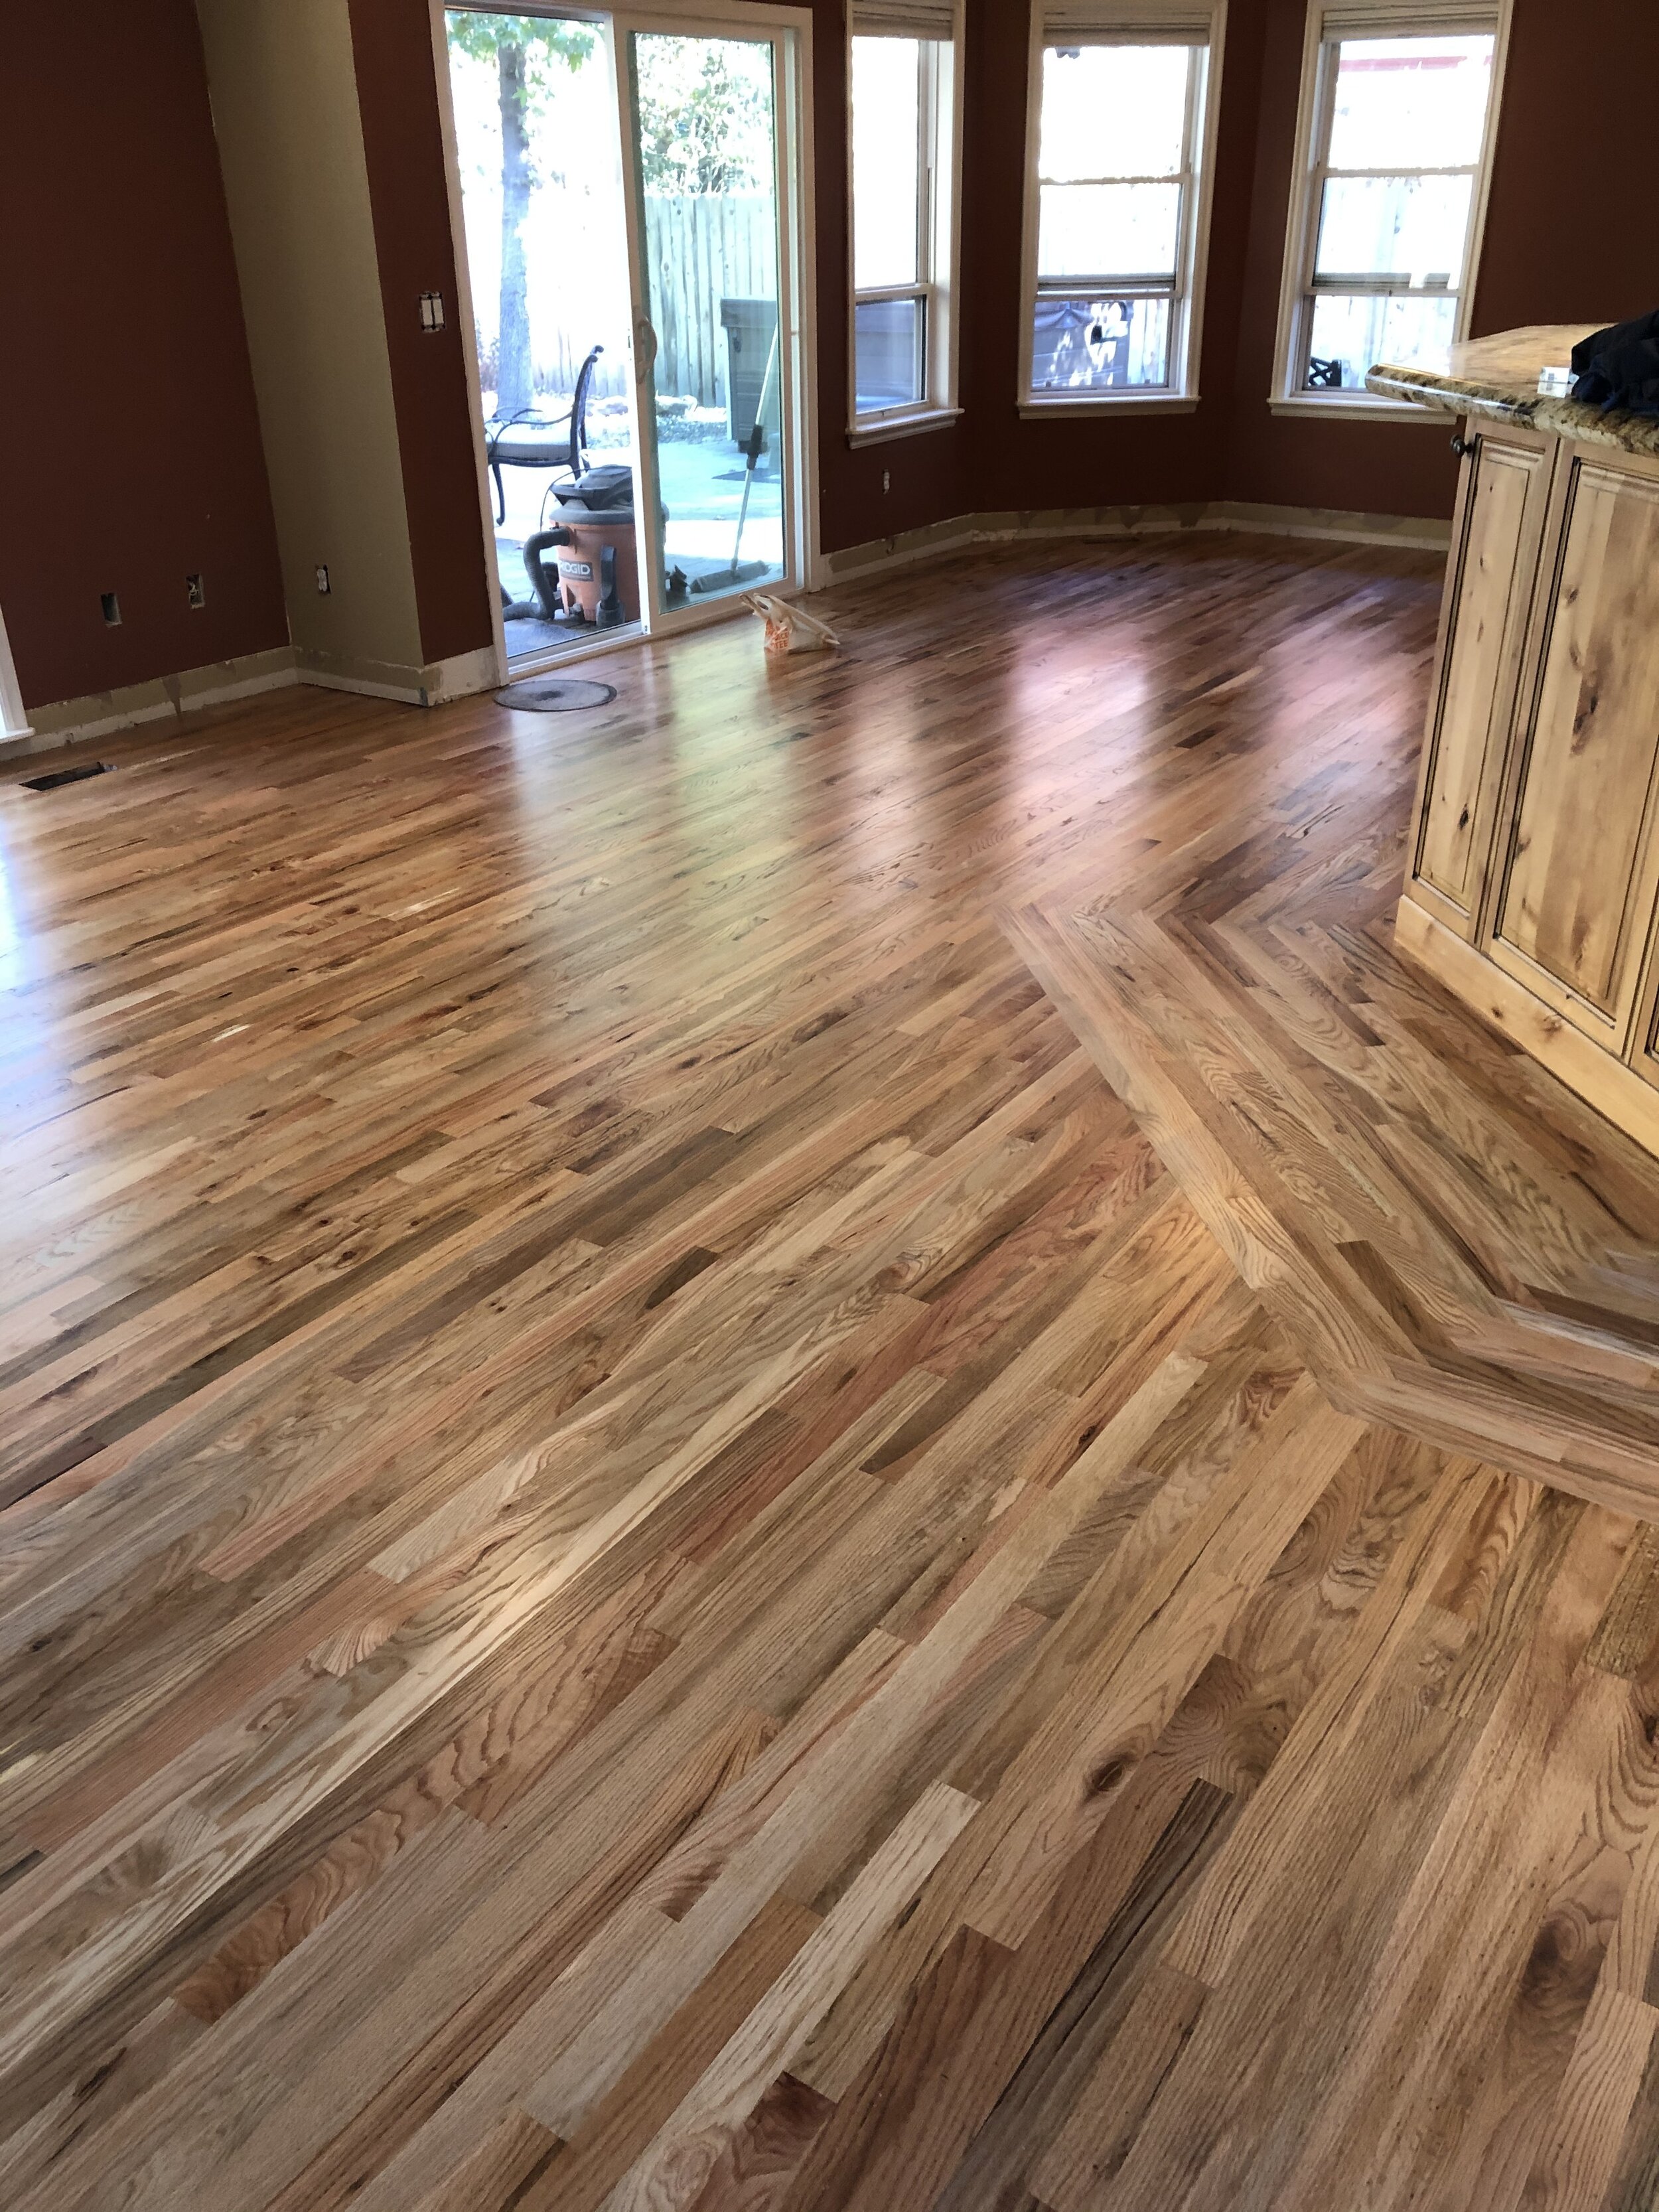 Cleaning And Caring For Your Hardwood Floor Sawtooth Flooring